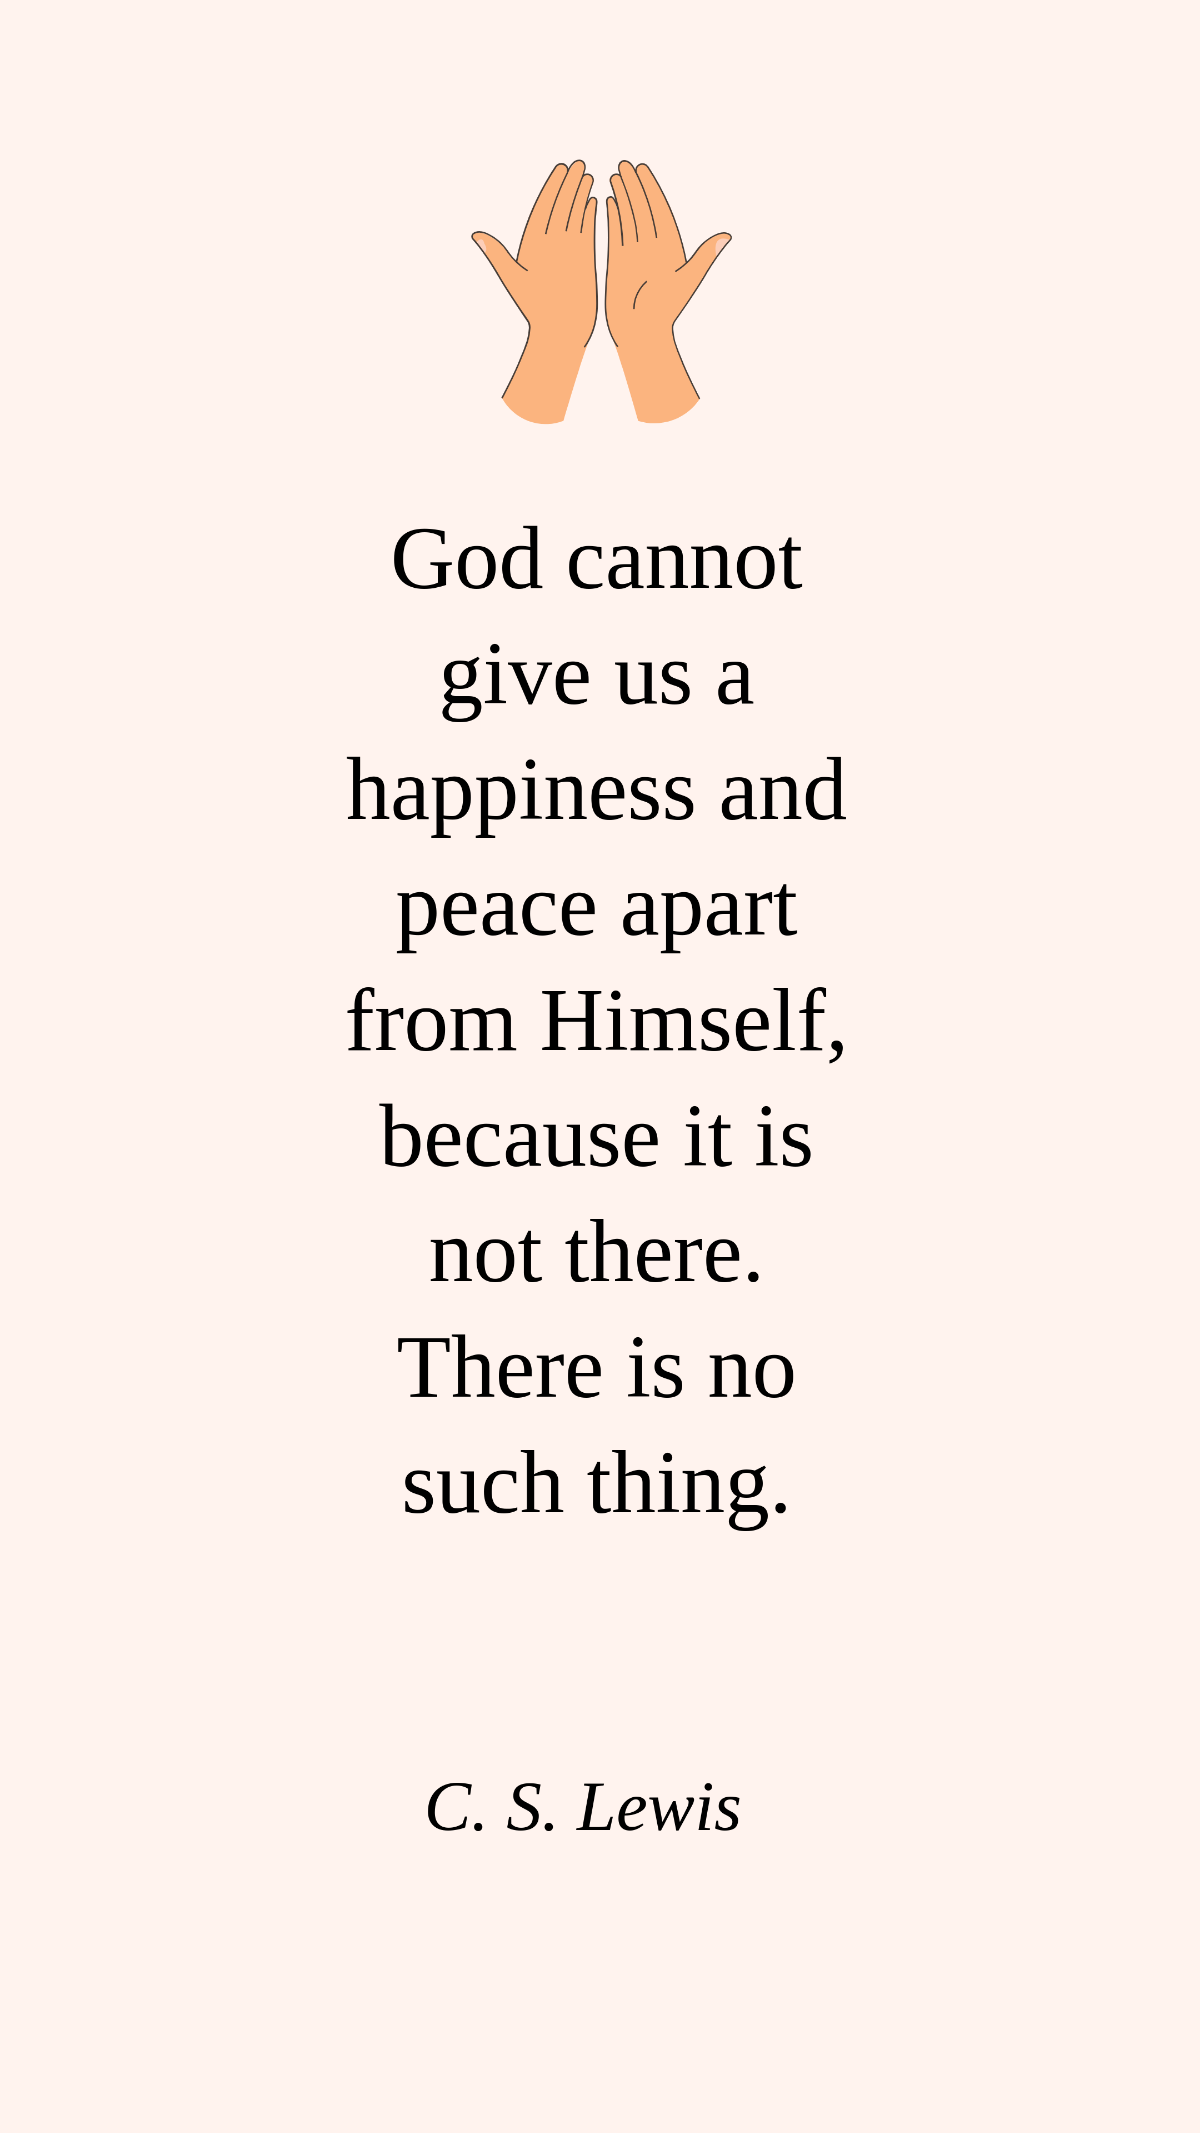 C. S. Lewis - God cannot give us a happiness and peace apart from Himself, because it is not there. There is no such thing.  Template